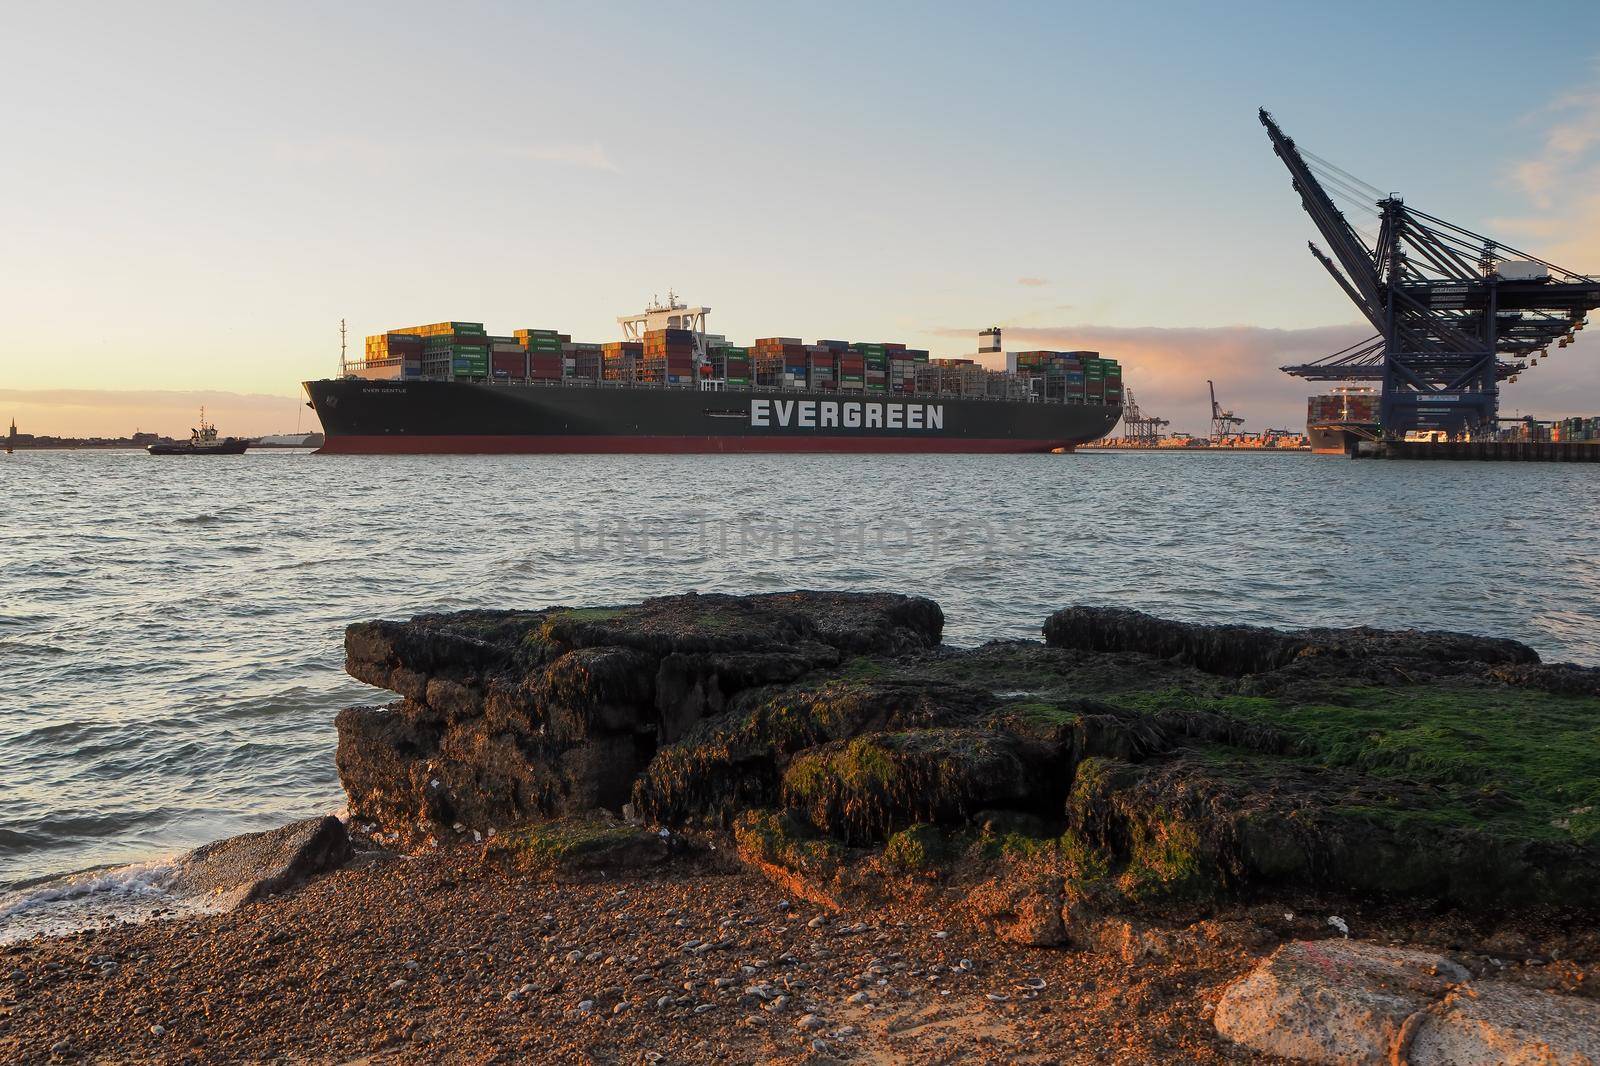 Port of Felixstowe, Suffolk, container ship Ever Gentle with tug boat at dusk by PhilHarland